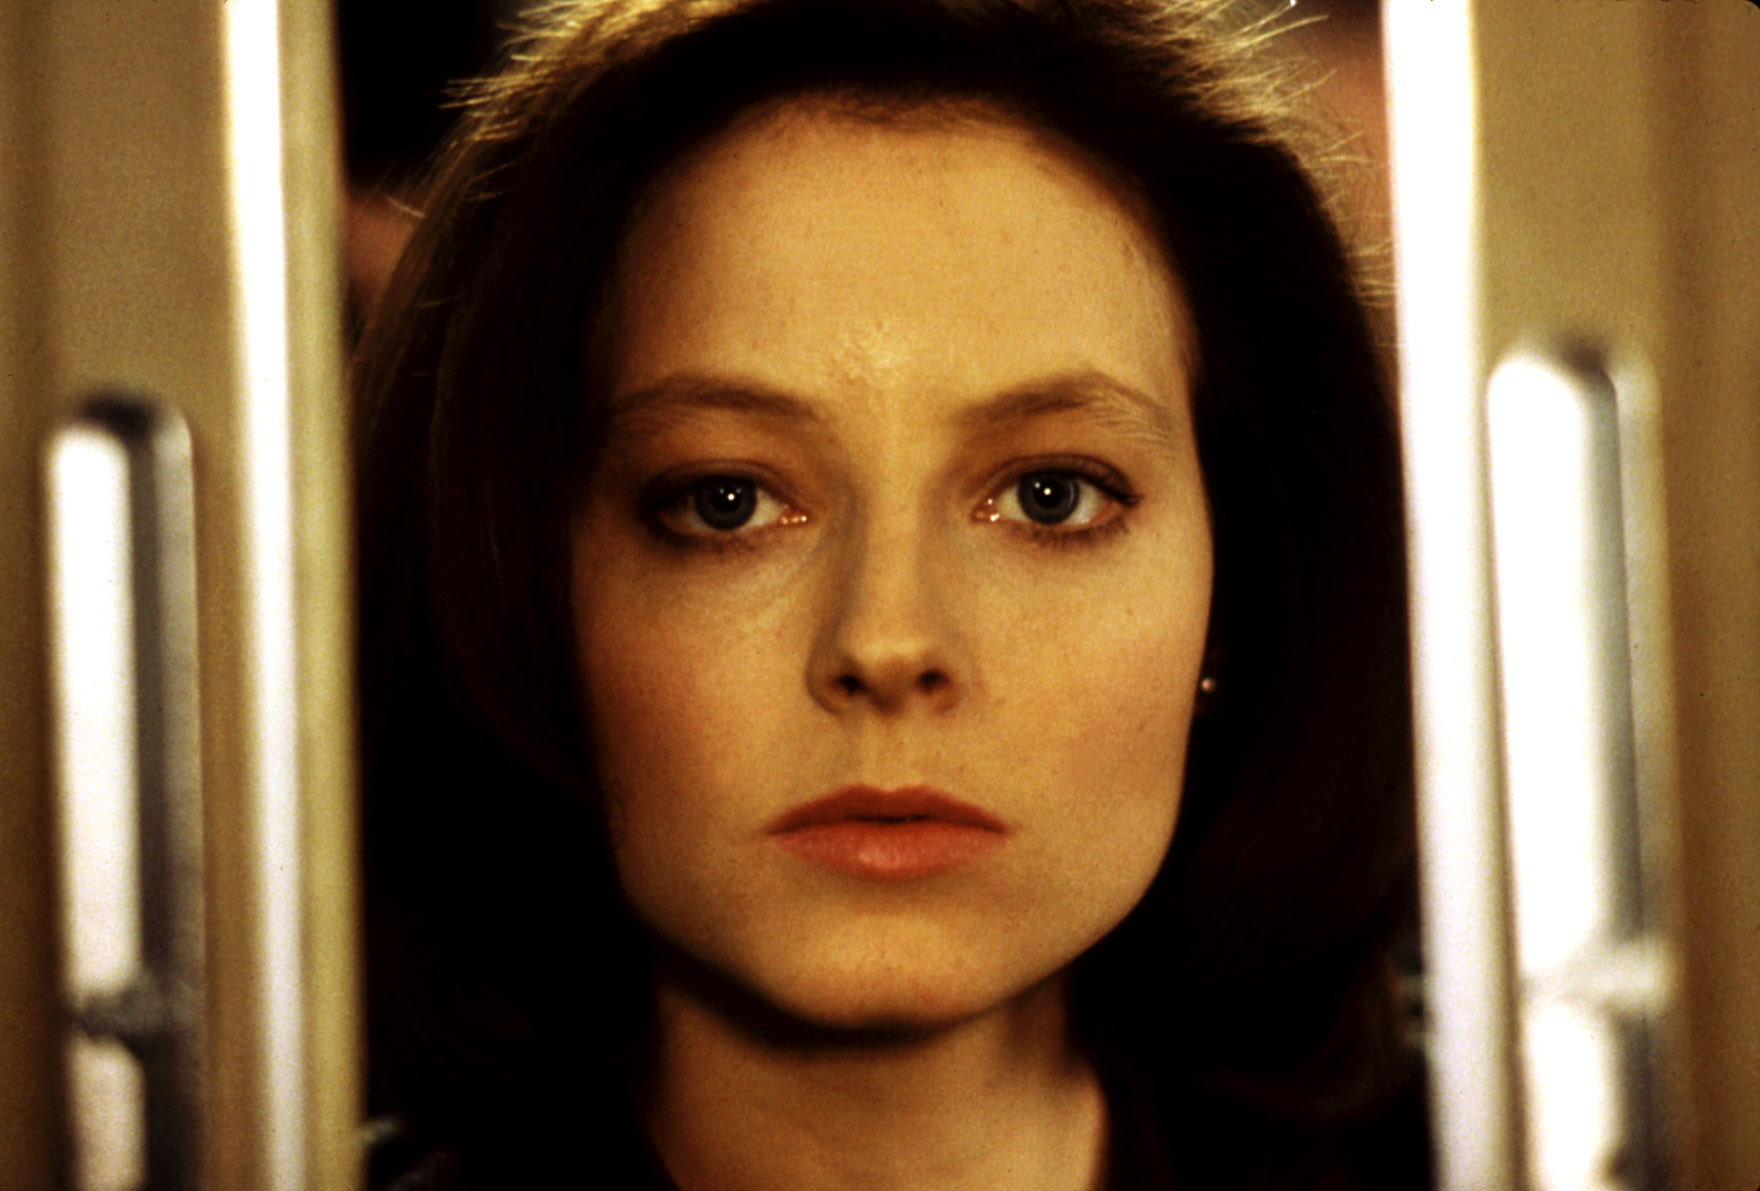 extreme closeup of actress Jodie Foster as FBI Agent Clarice Starling in the 1991 movie "The Silence of the Lambs"